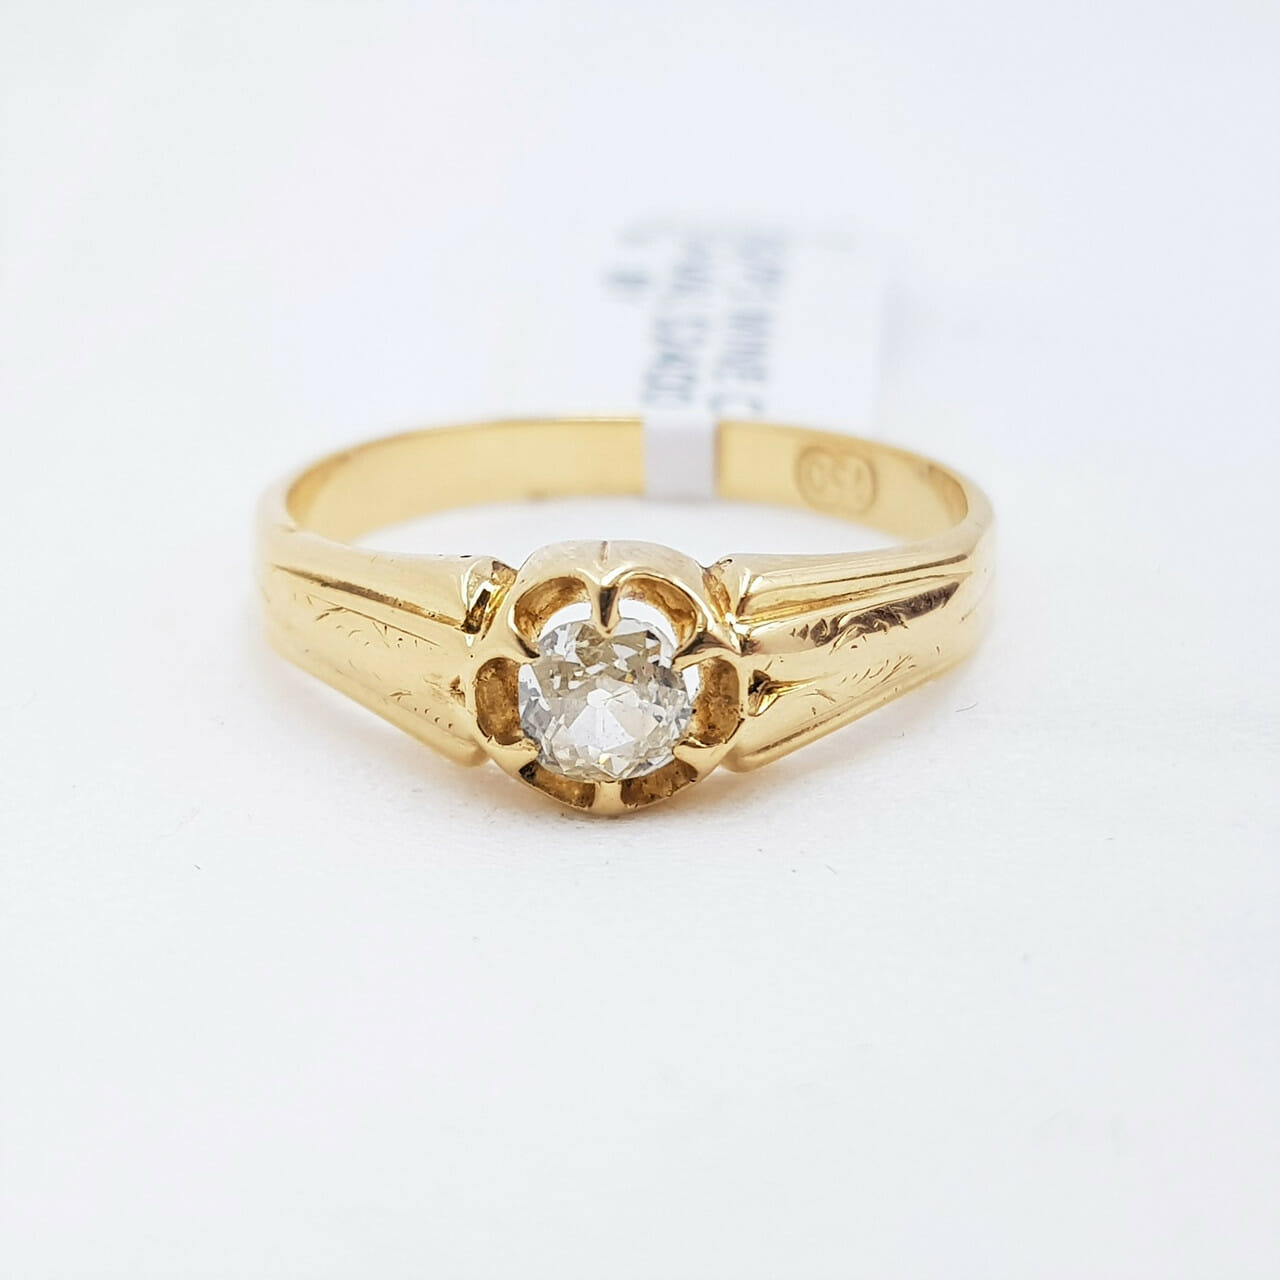 18CT 3.5GR YELLOW GOLD SOLITAIRE DIAMOND RING VAL $2400 SIZE O #51365